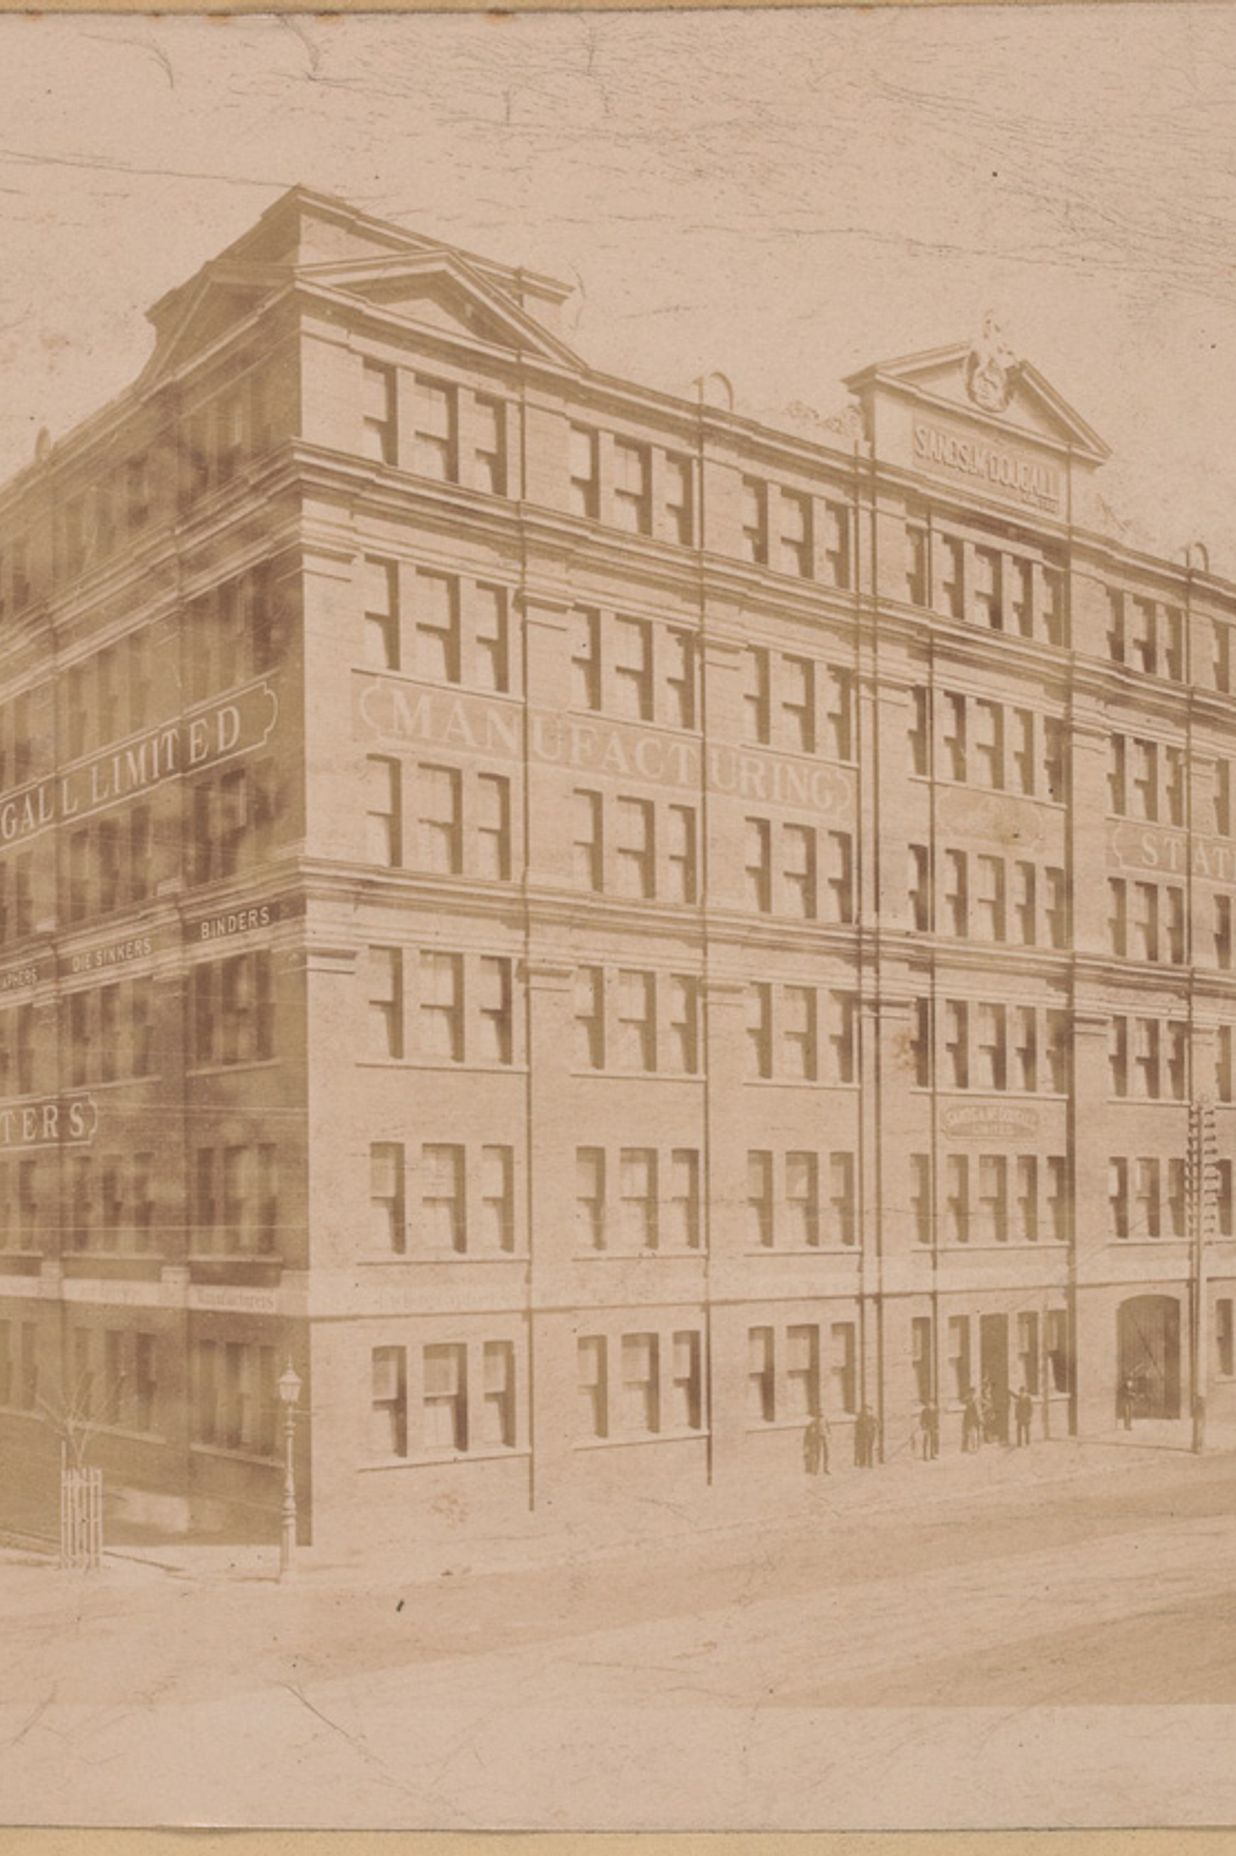 Sands &amp; McDougall Limited (1896) Factory Spencer Street. H84.460. Pictures Collection, State Library Victoria